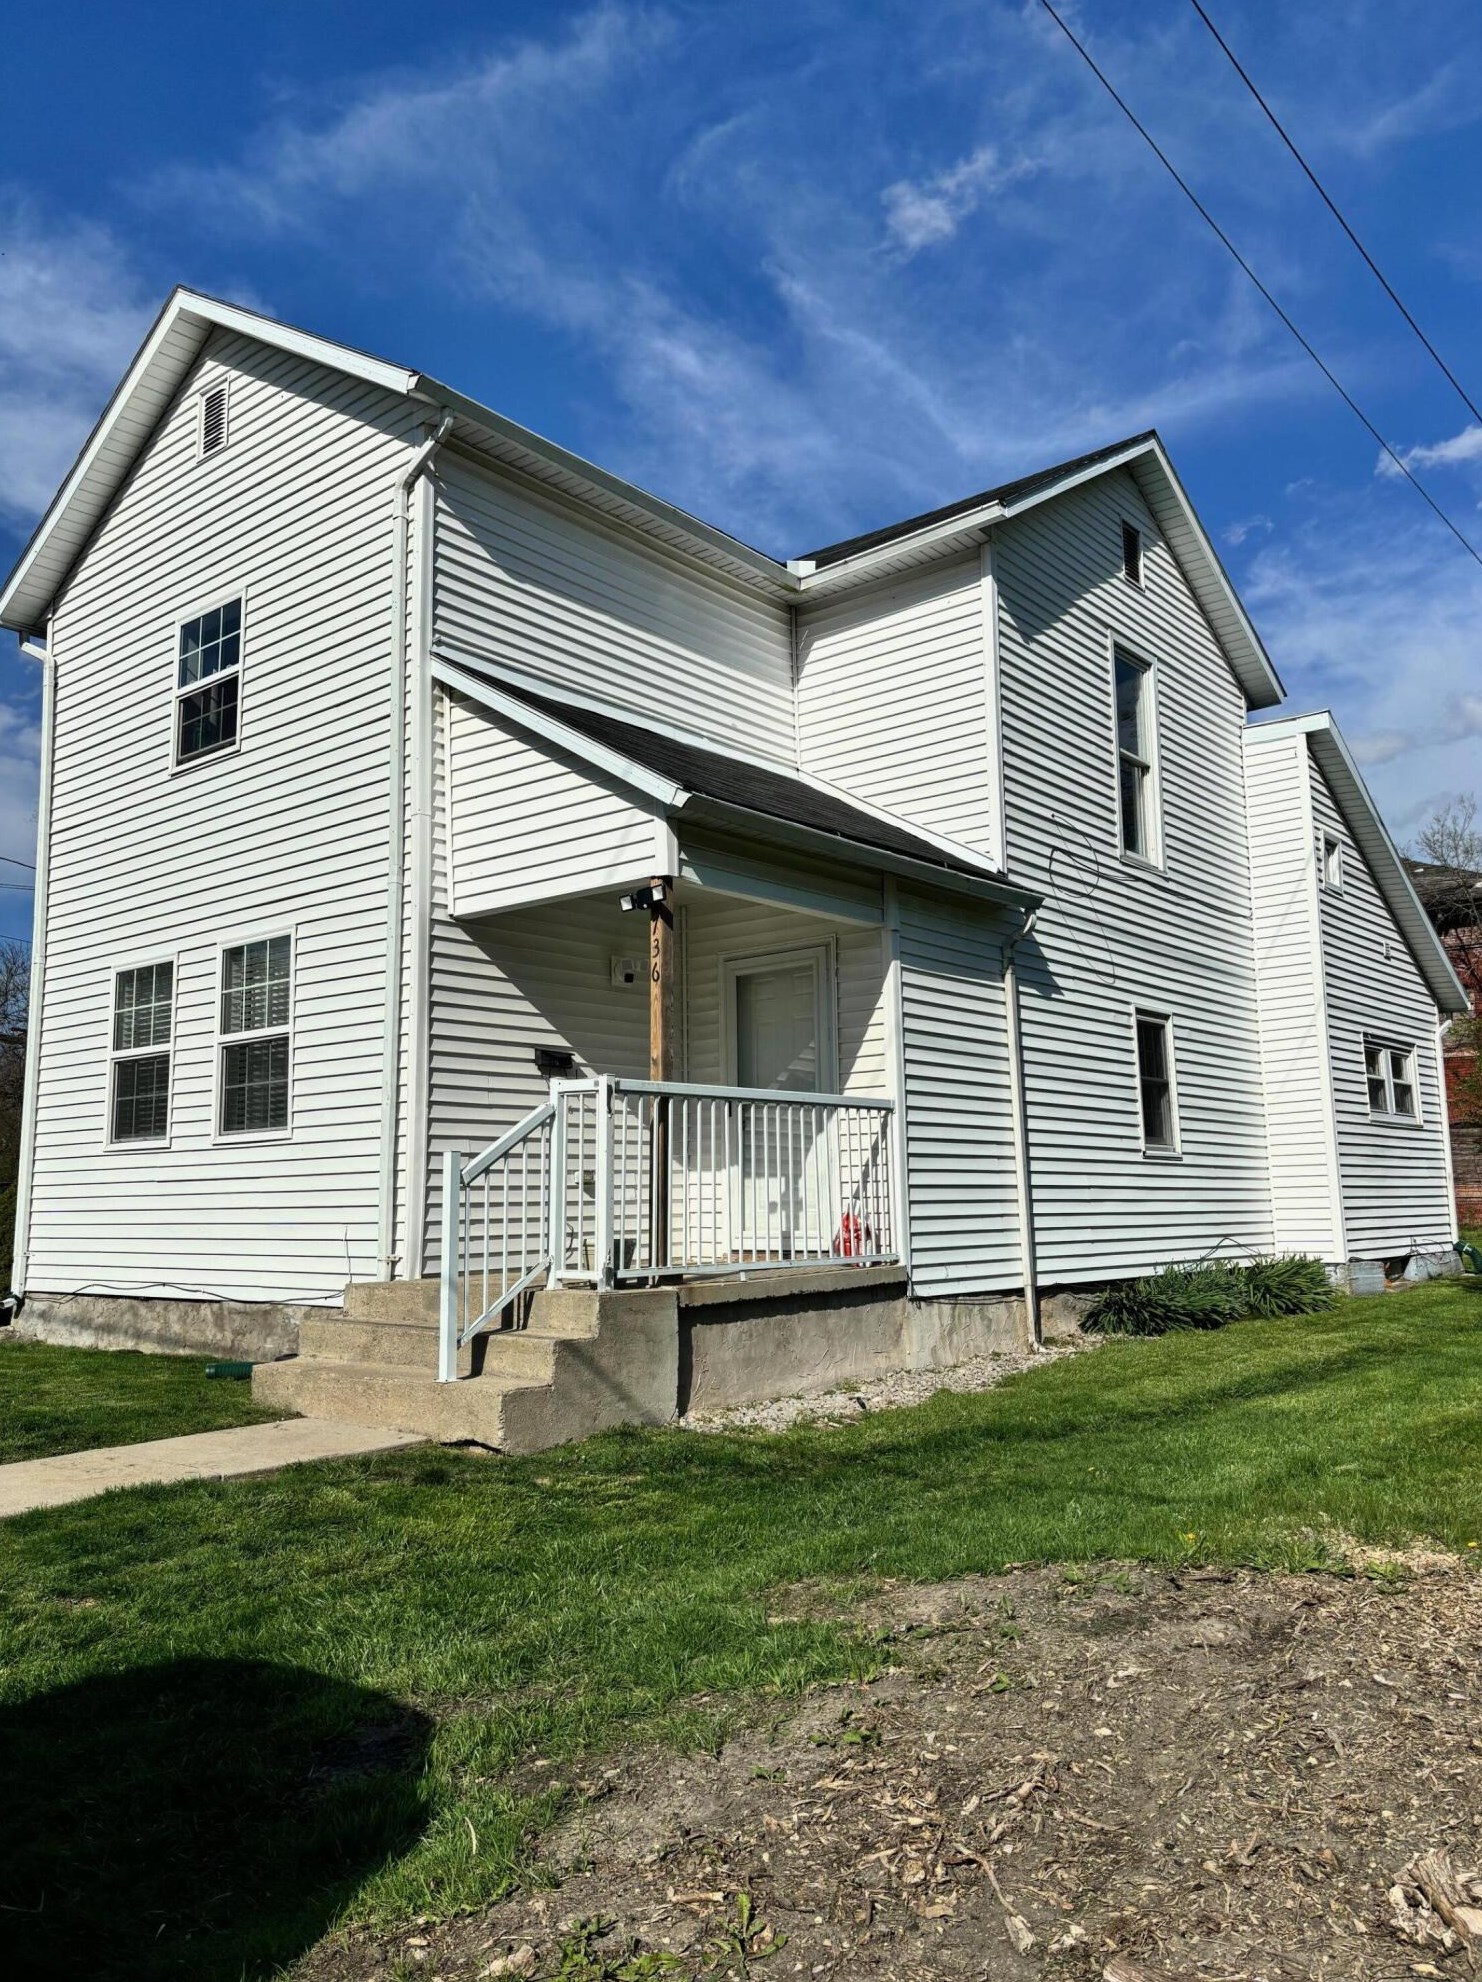 736 Euclid St, Bellefontaine, OH 43311